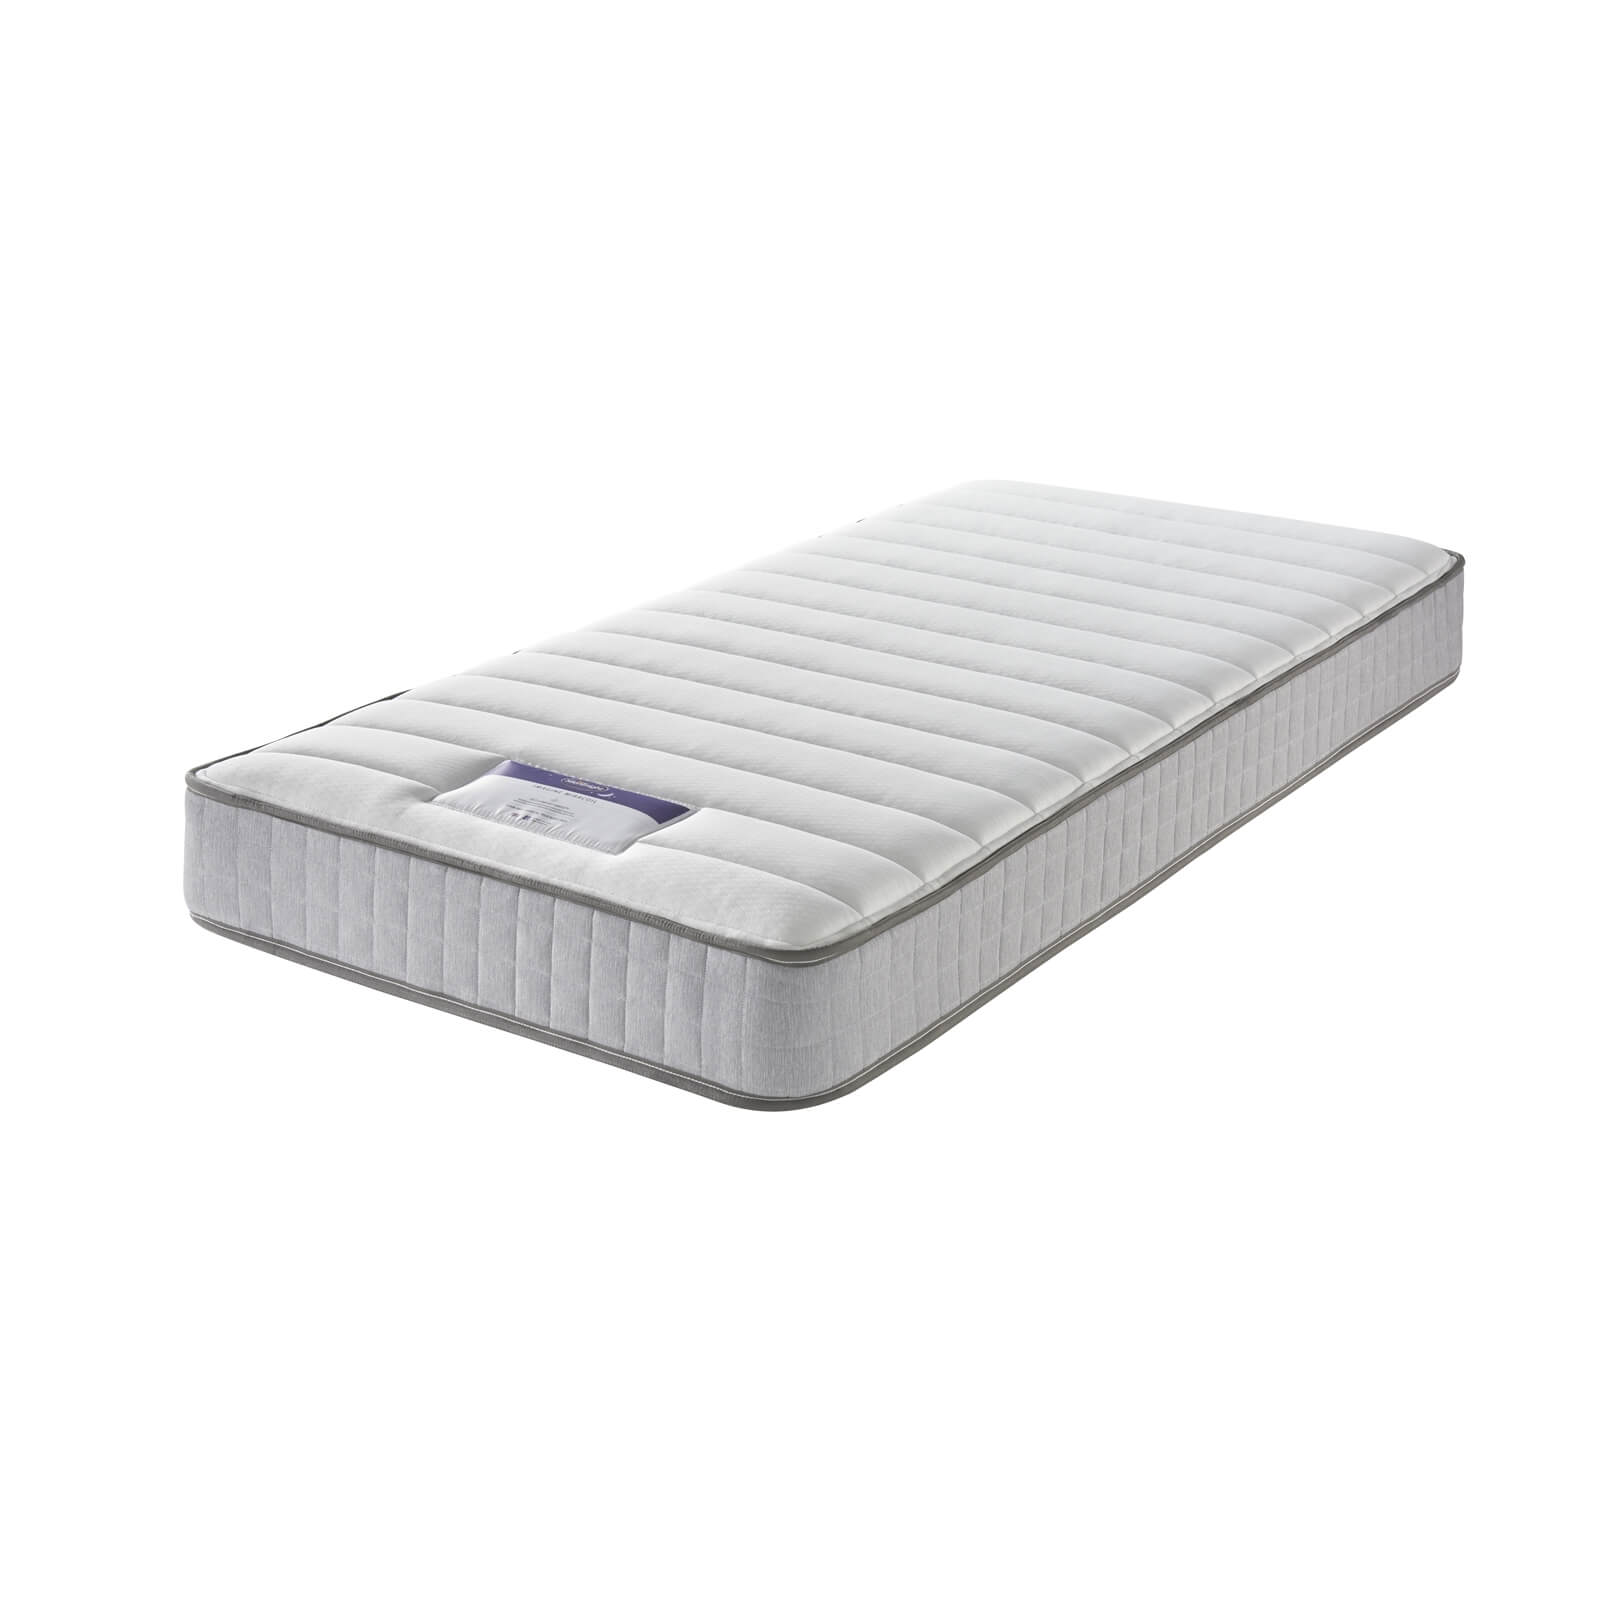 Silentnight Healthy Growth Miracoil Kids Mattress - Small Double